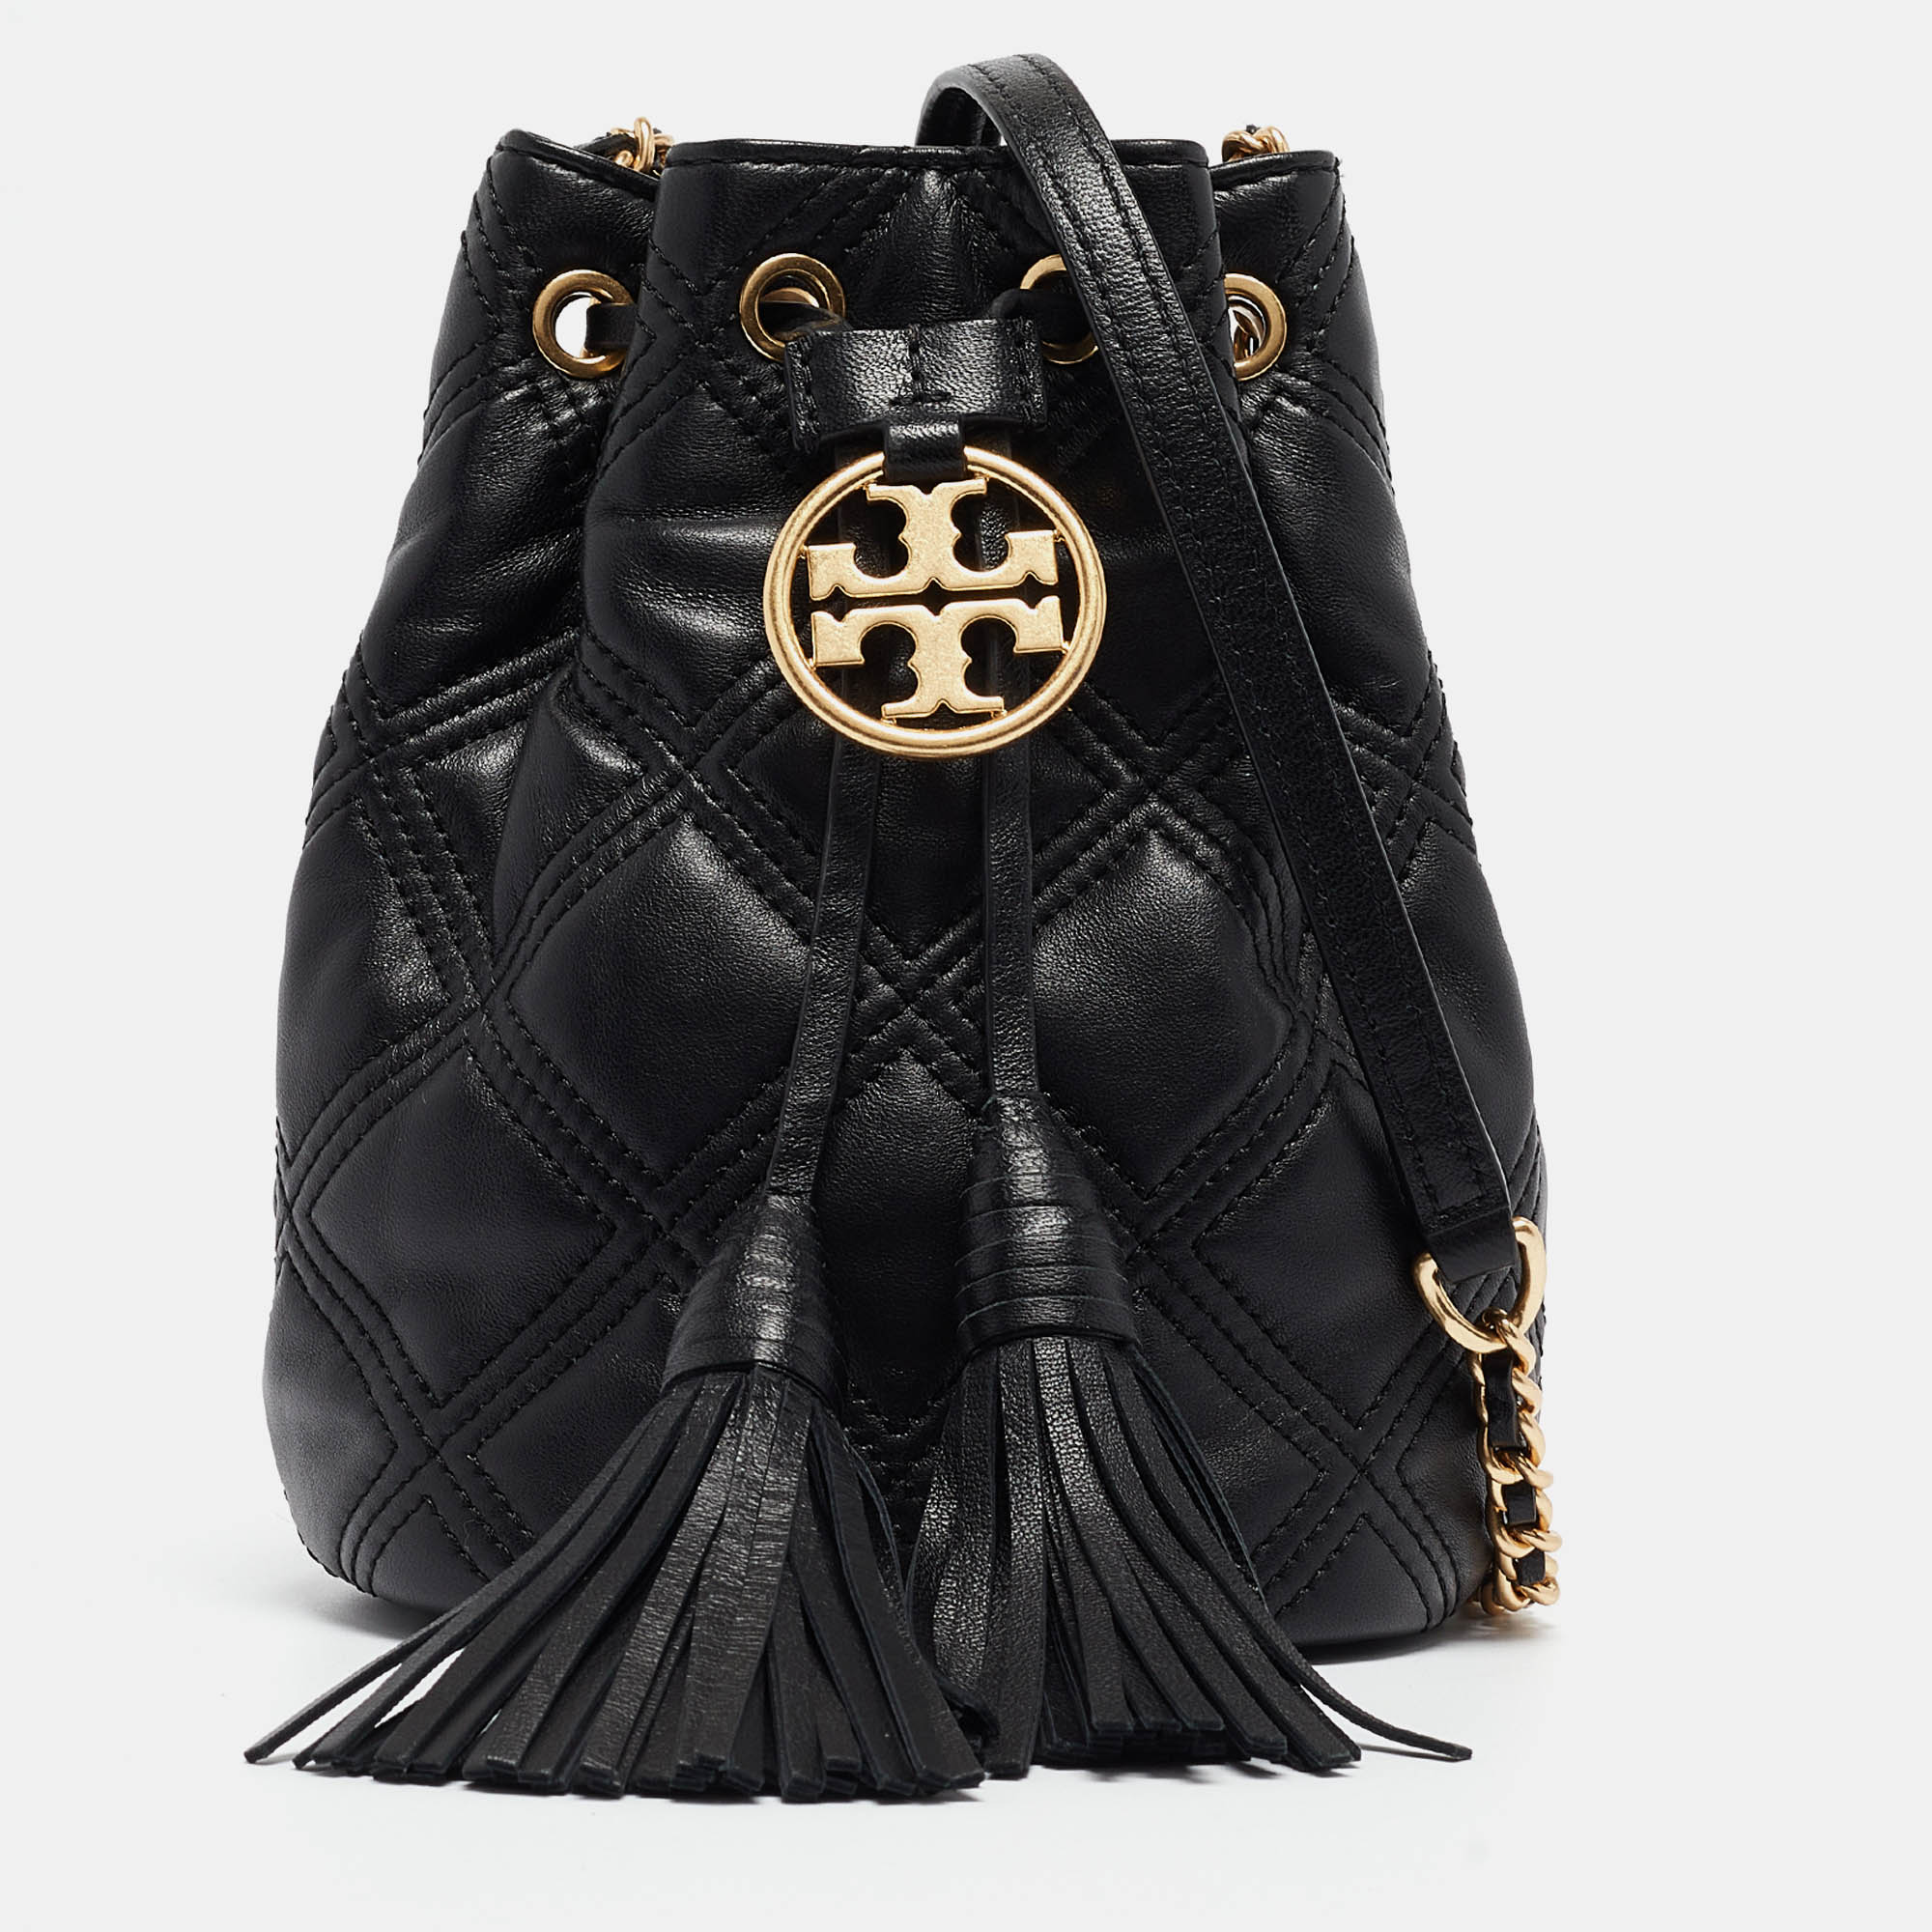 Pre-owned Tory Burch Black Quilted Leather Mini Soft Fleming Bucket Bag